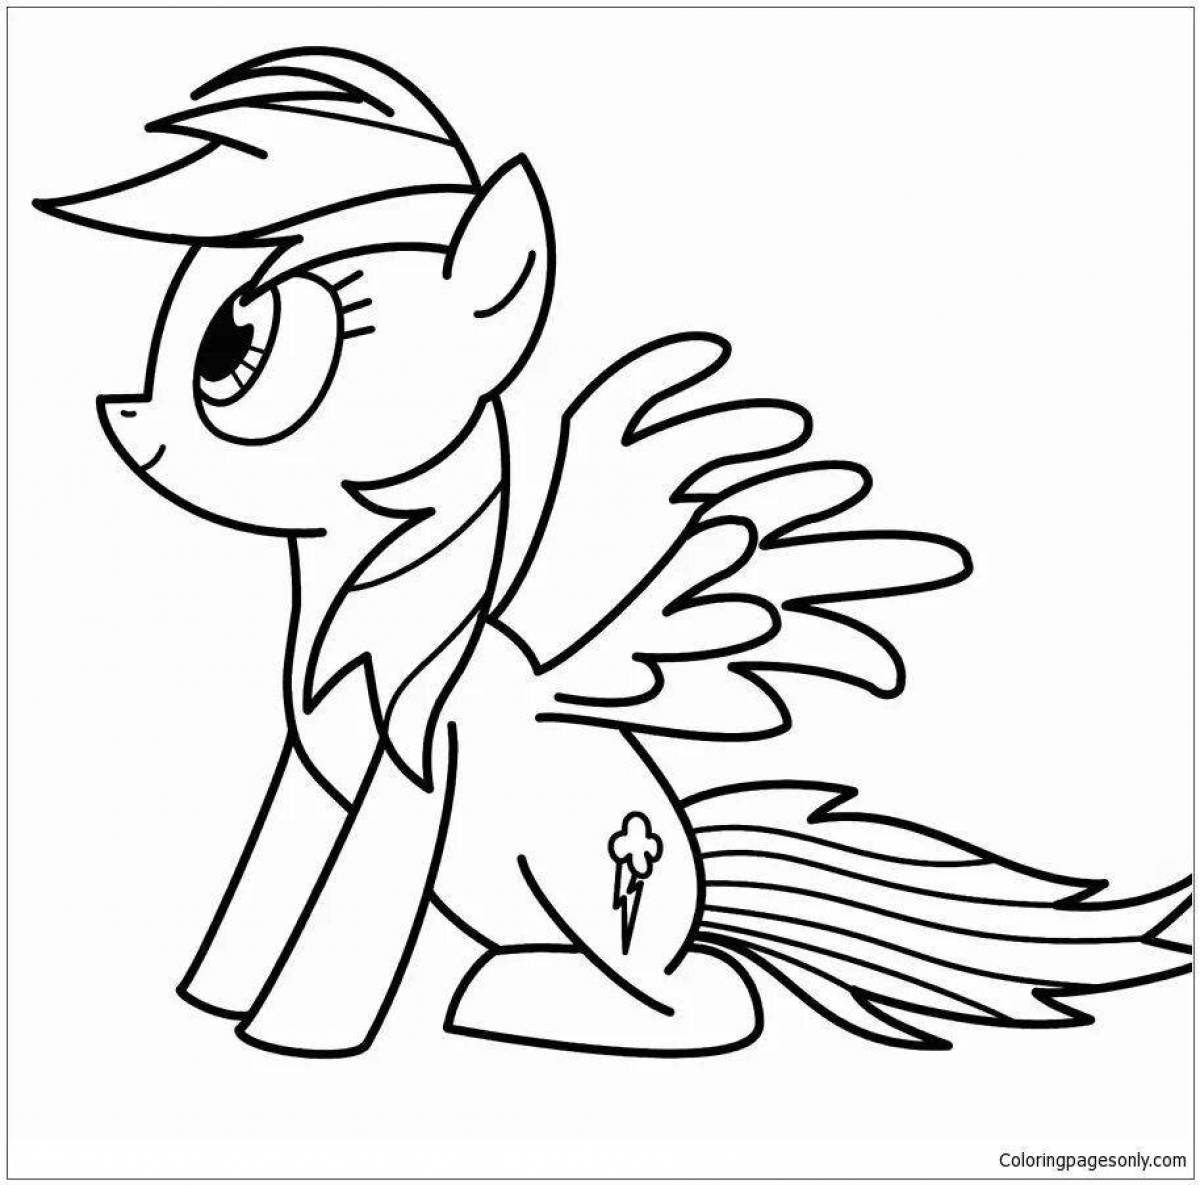 Gorgeous rainbow dash coloring page